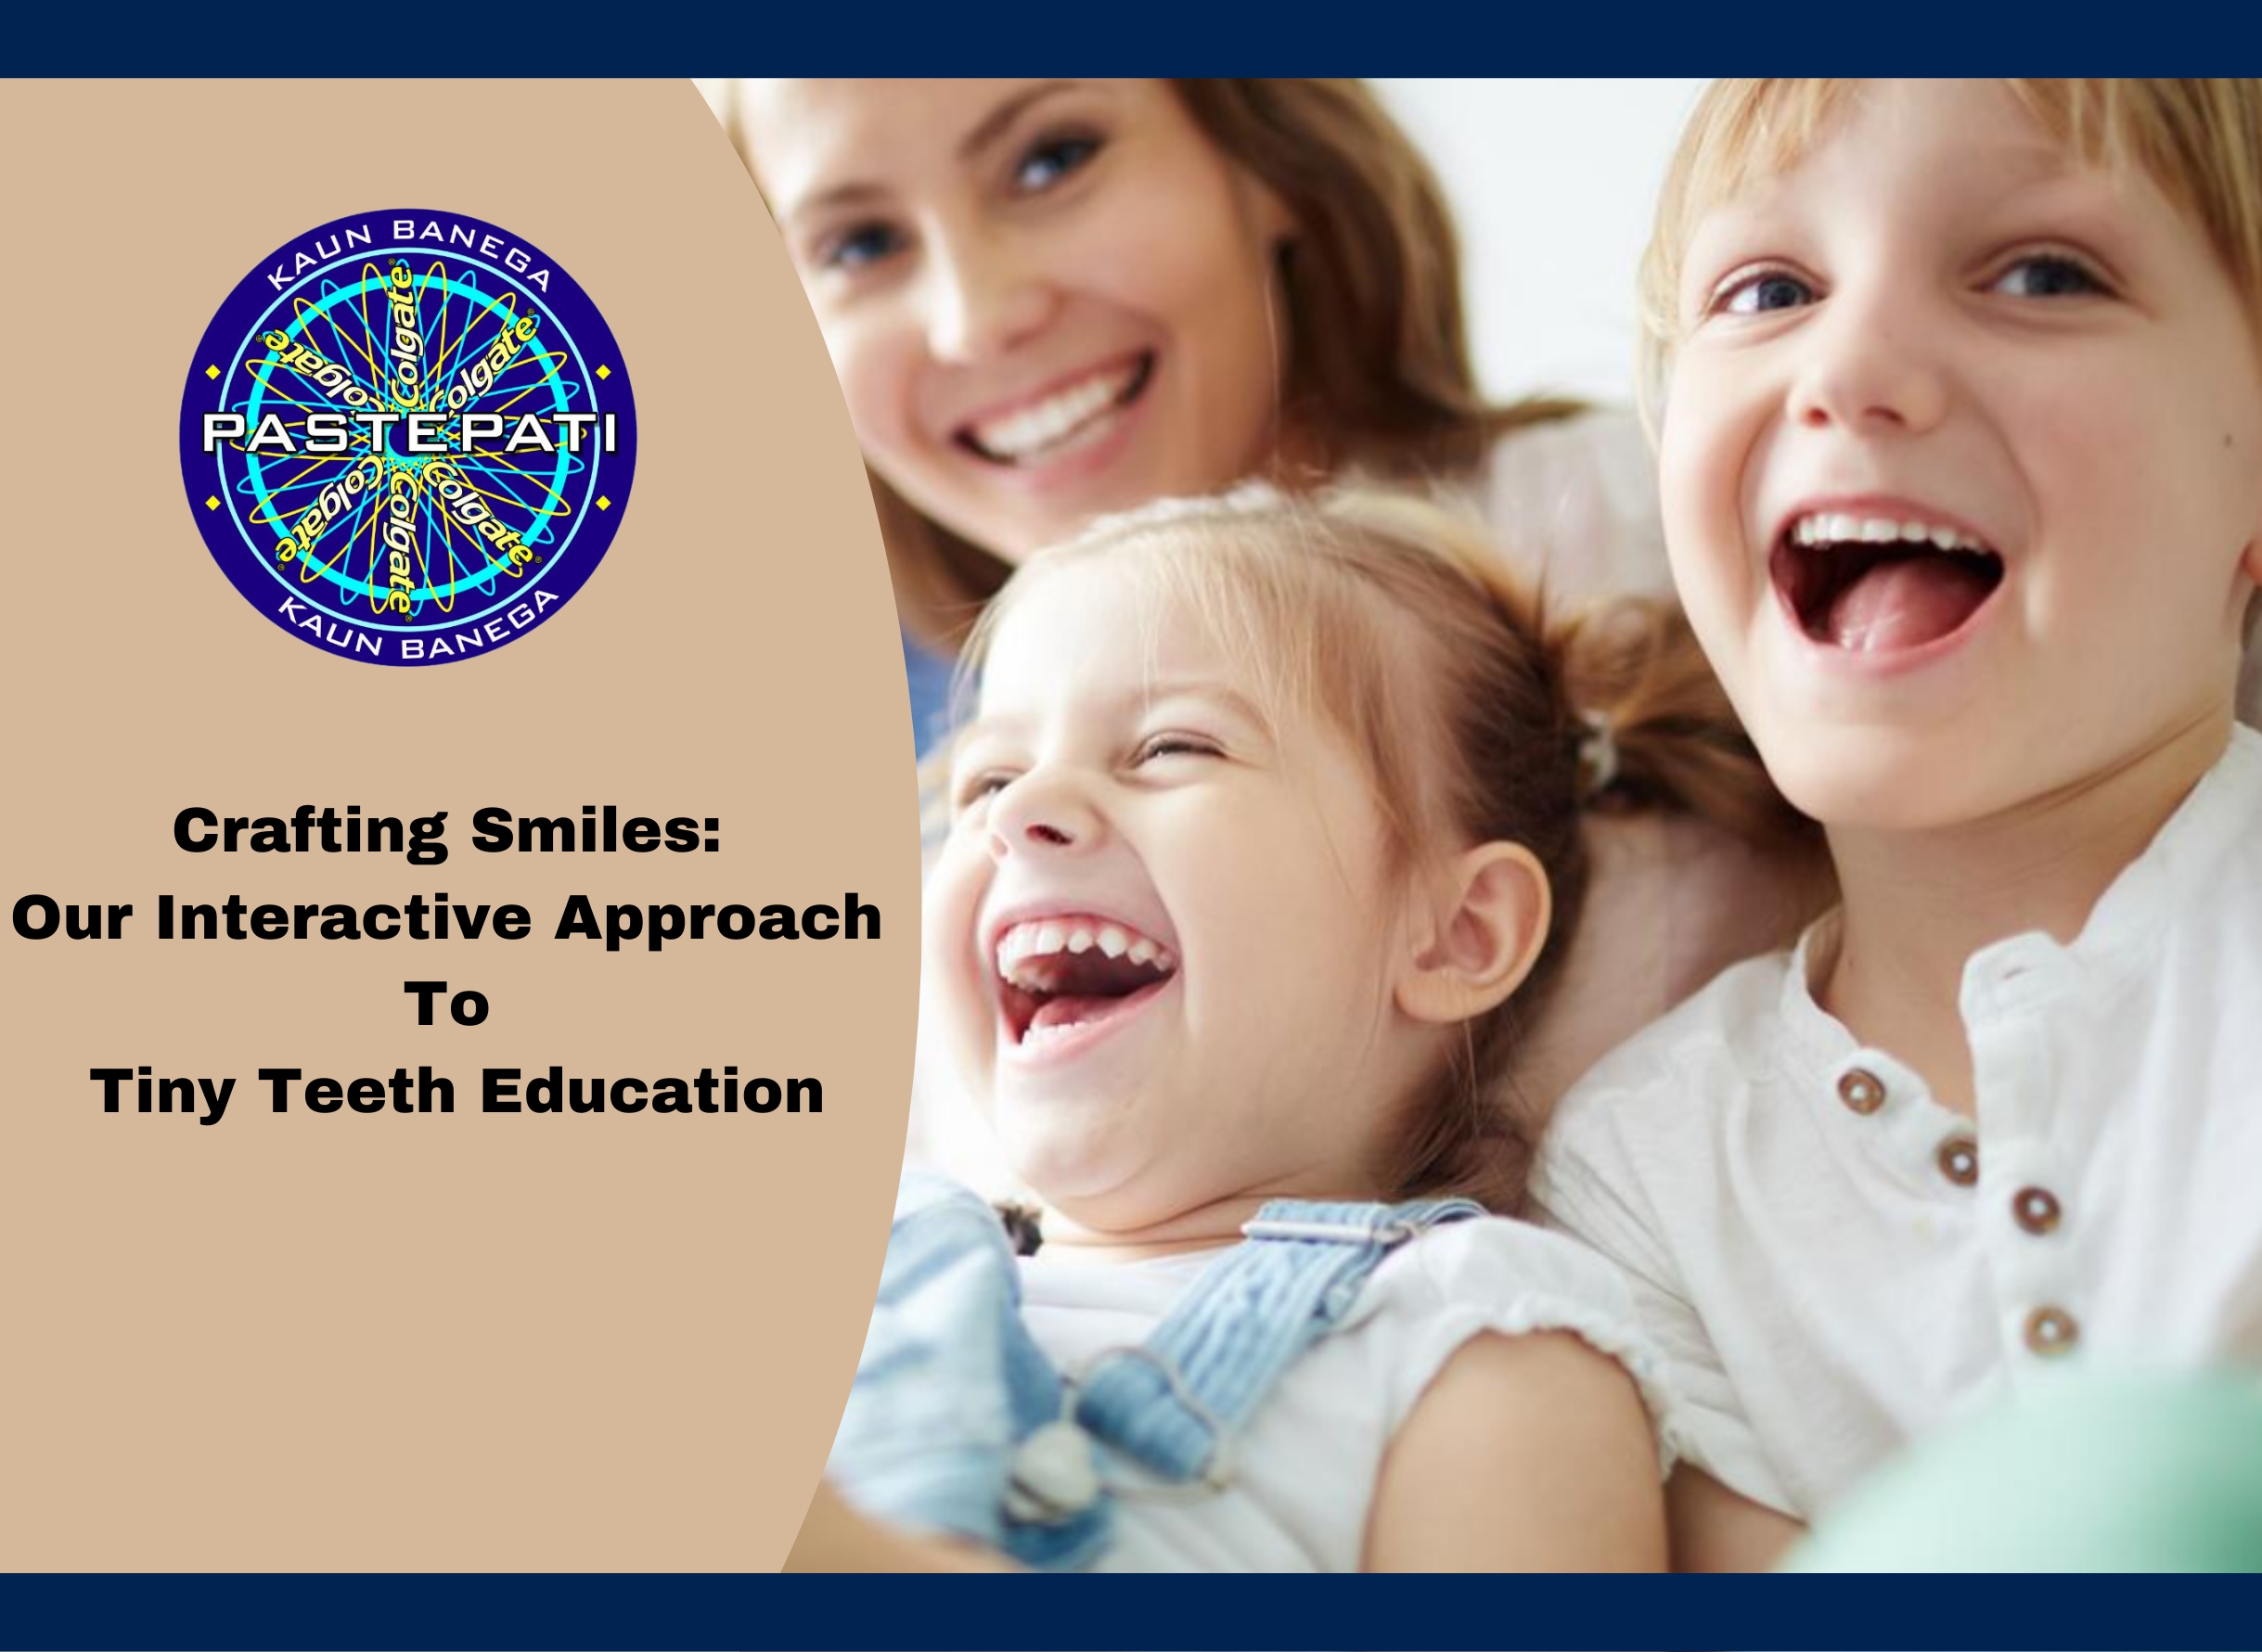 Crafting Smiles: Our Interactive Approach to Tiny Teeth Education